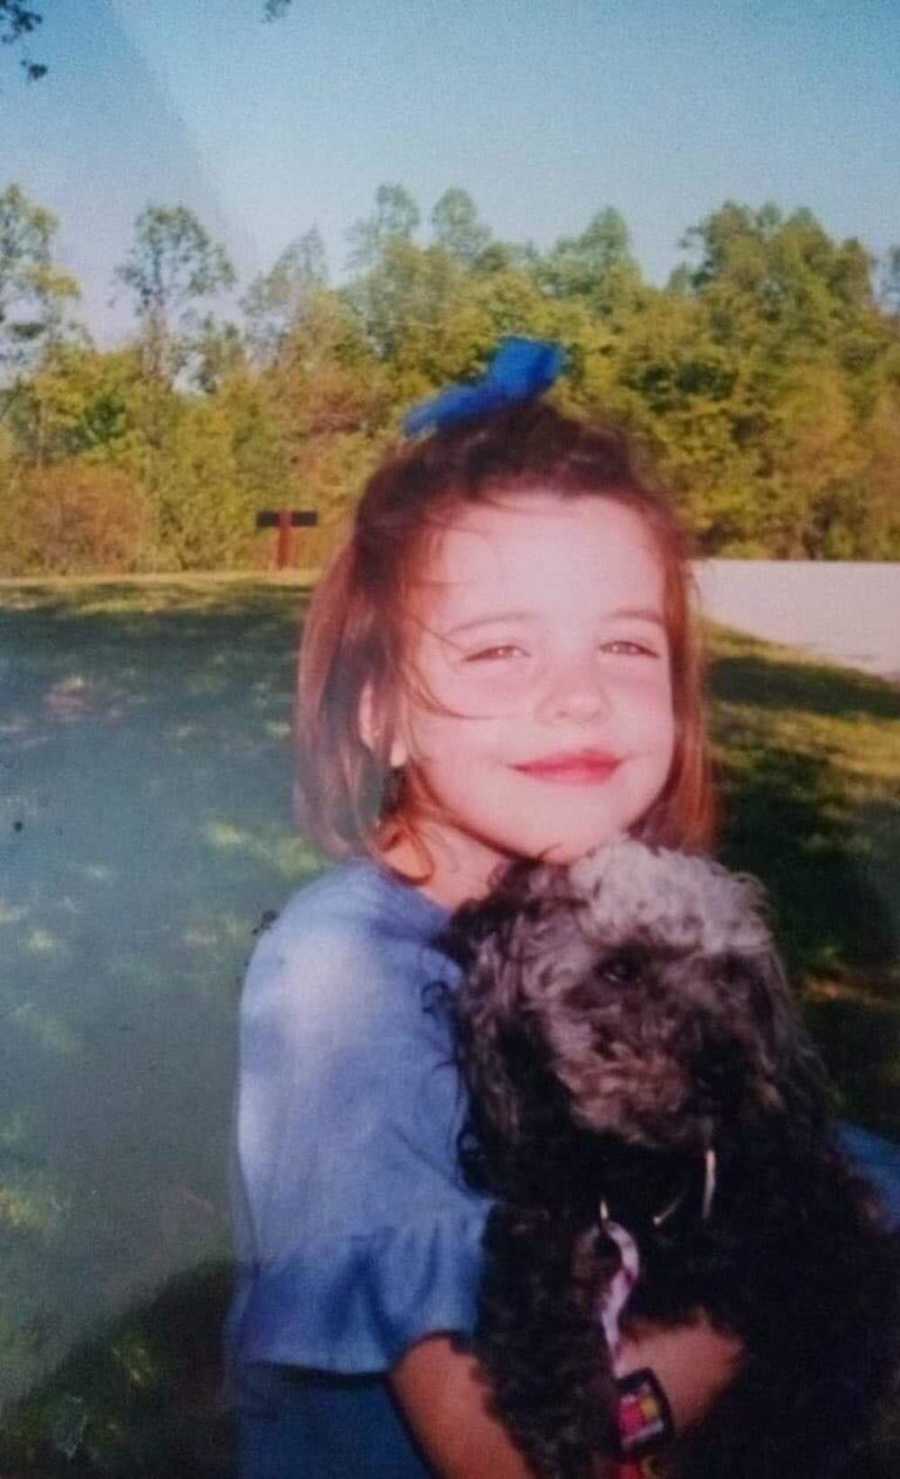 Little girl smiling holding dog who will get raped later in life